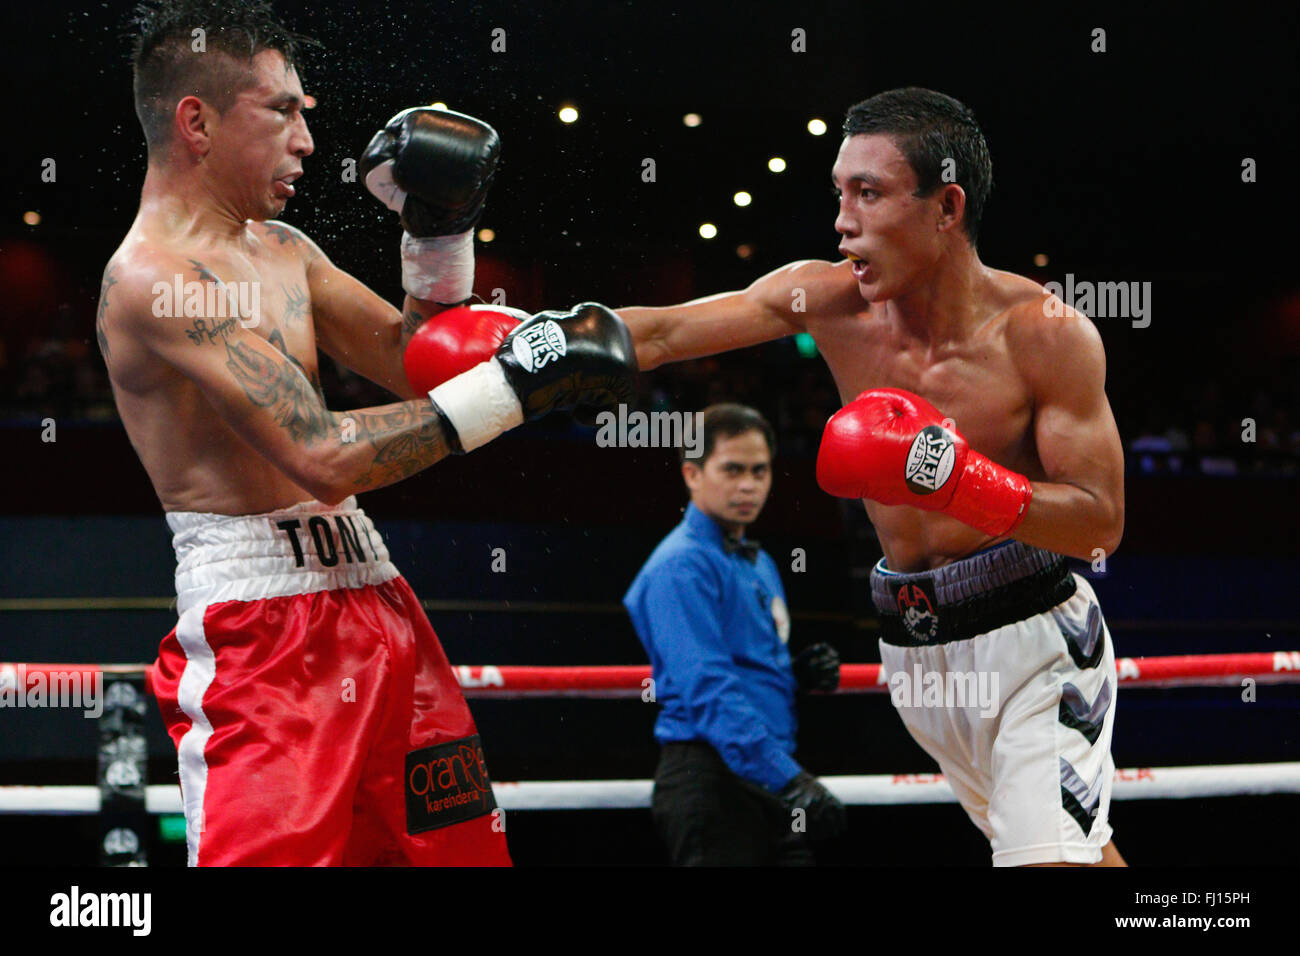 Waterfront Hotel,Cebu City,Philippines 27/02/2016.Pinoy Pride 35 'Stars of The Future' boxing event.Filipino Kevin Jake 'KJ' Cataraja (white trunks), battles with Tony Rodriguez of Mexico in a Flyweight match up.Cataraja taking the 8 round fight by decision. Stock Photo